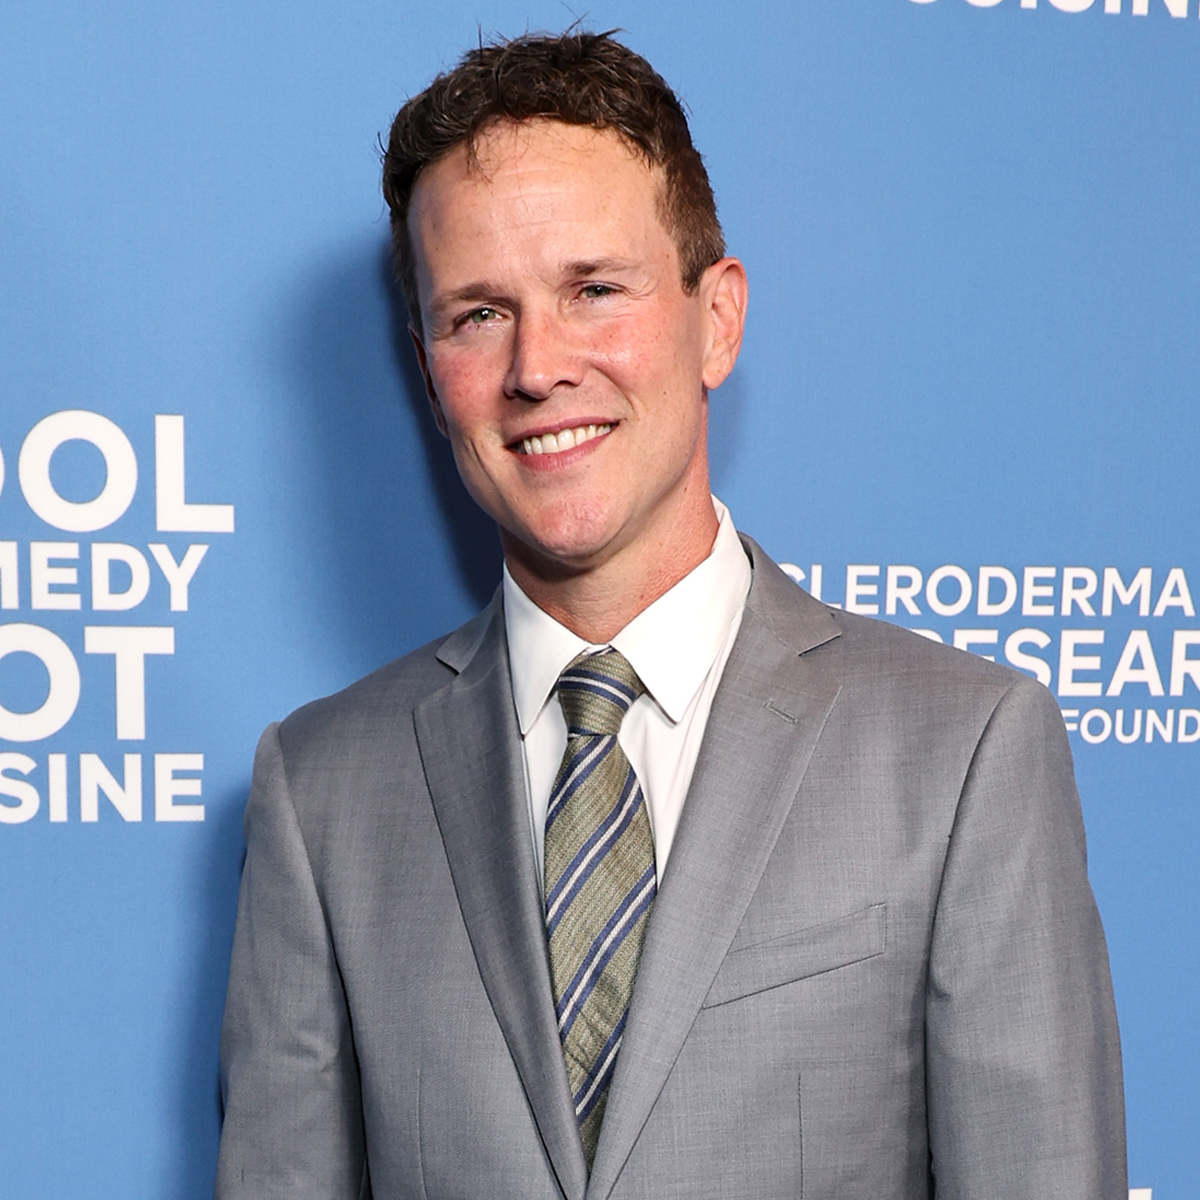 Aladdin's Scott Weinger on His Life-Changing Role and the Joys of Working With Robin Williams